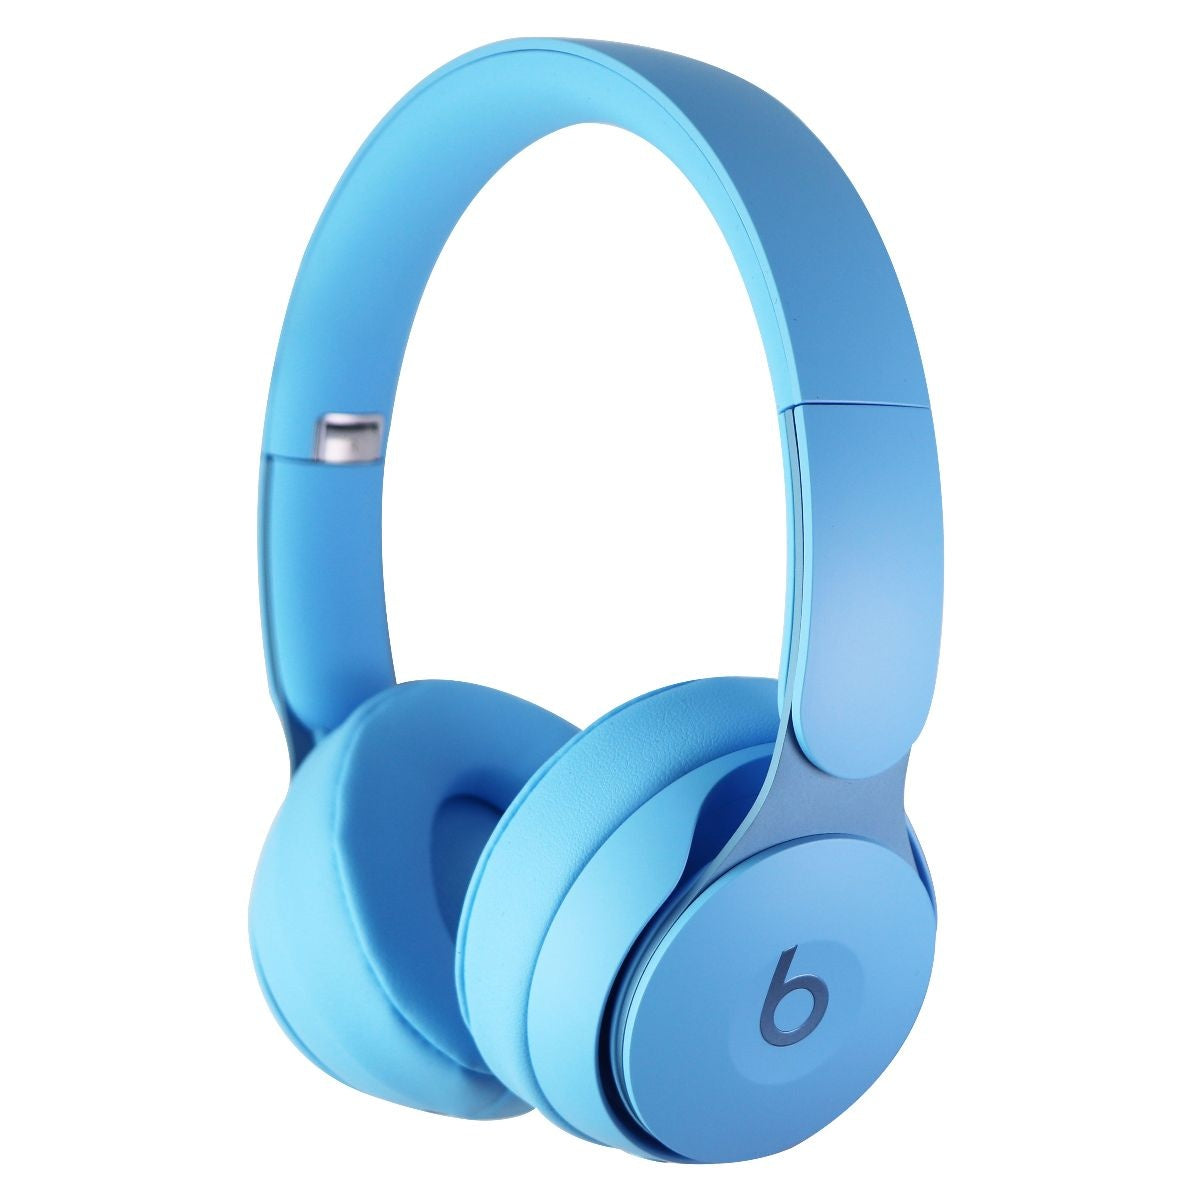 Beats Solo Pro Wireless NC On-Ear Headphones - More Matte Collection Light Blue